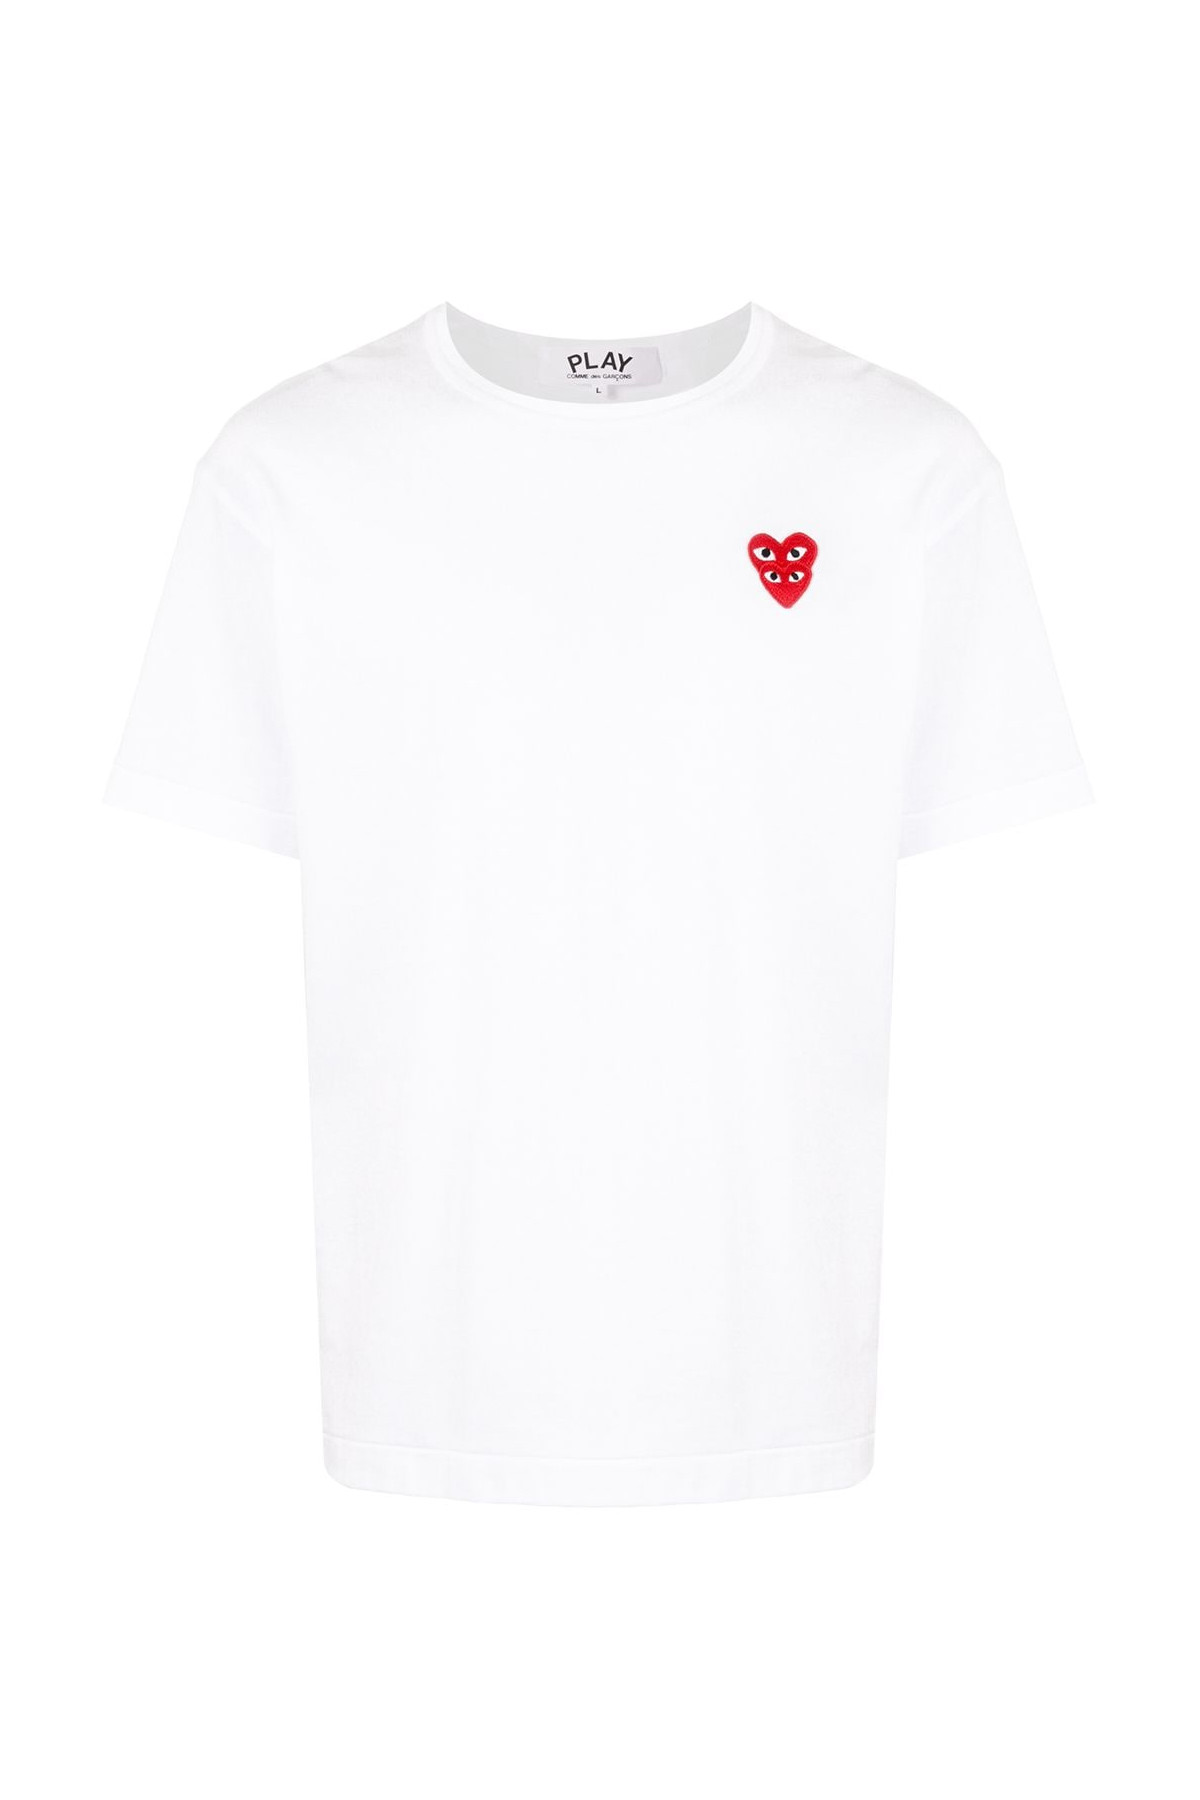 Mens T-Shirt Multi Red Red Heart P1T288